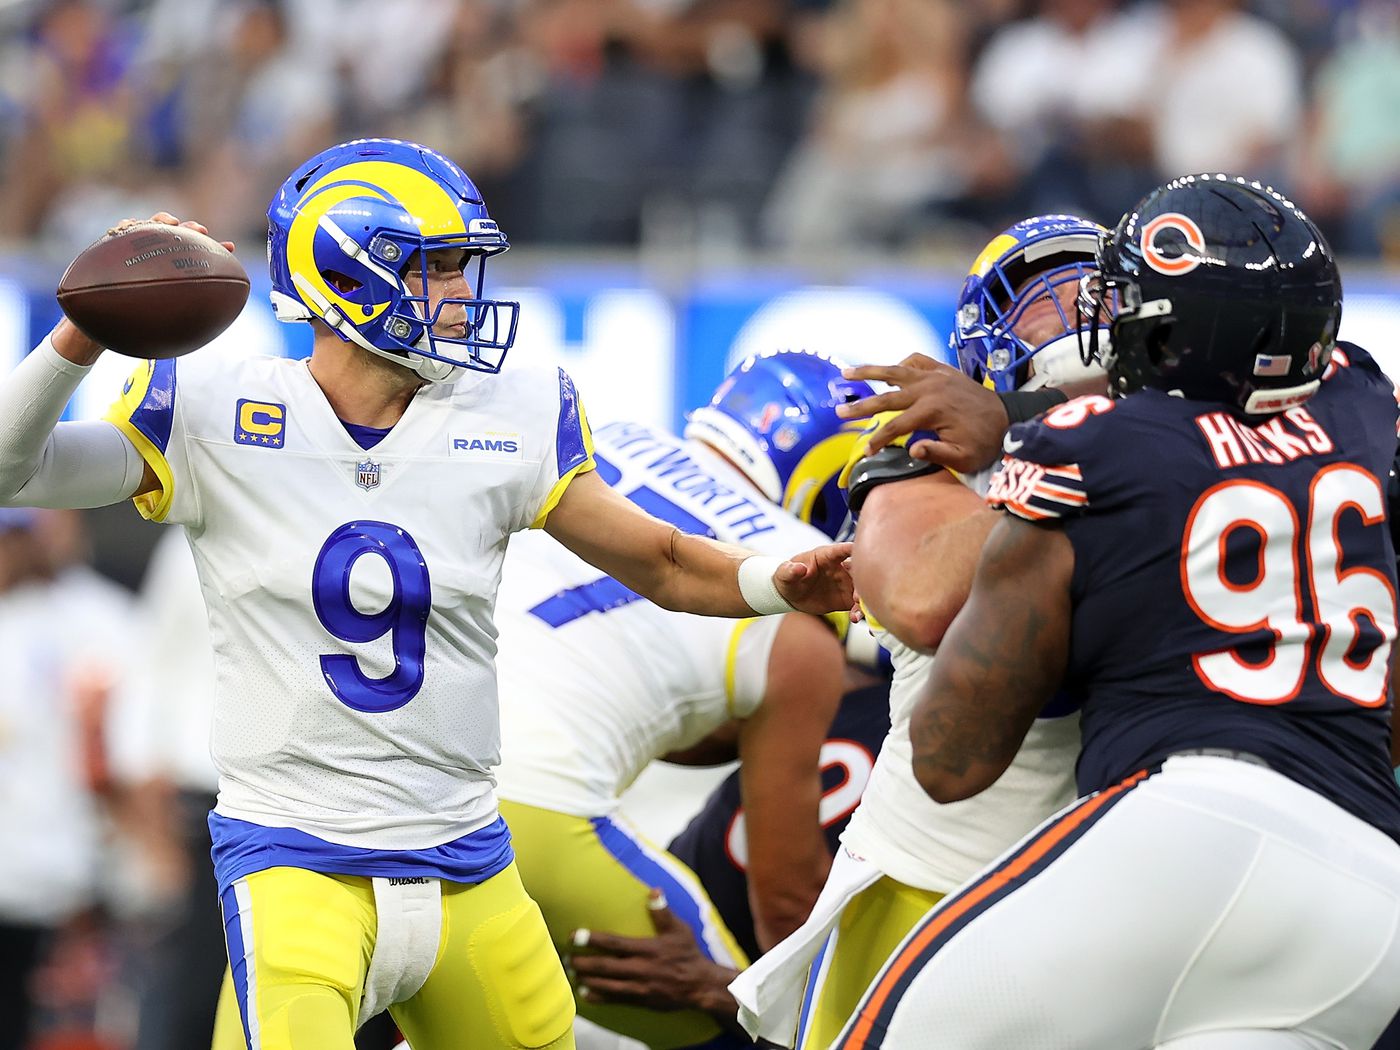 Matthew Stafford throws a pass for the Los Angeles Rams in a game against the Chicago Bears.